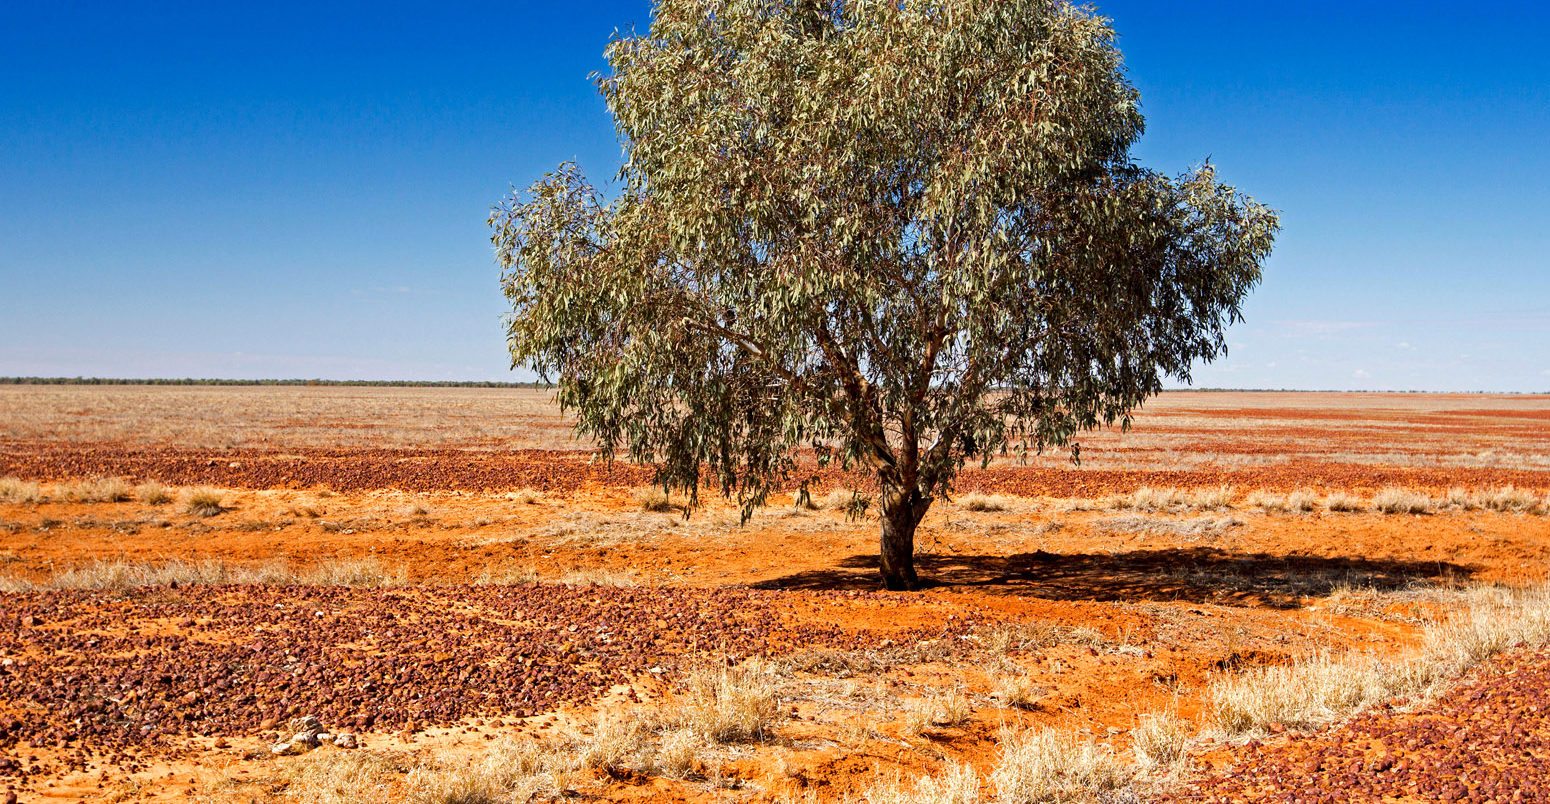 Solitary tree during a drought in Queensland, Australia. Credit: Outback Australia / Alamy Stock Photo. F56HKE